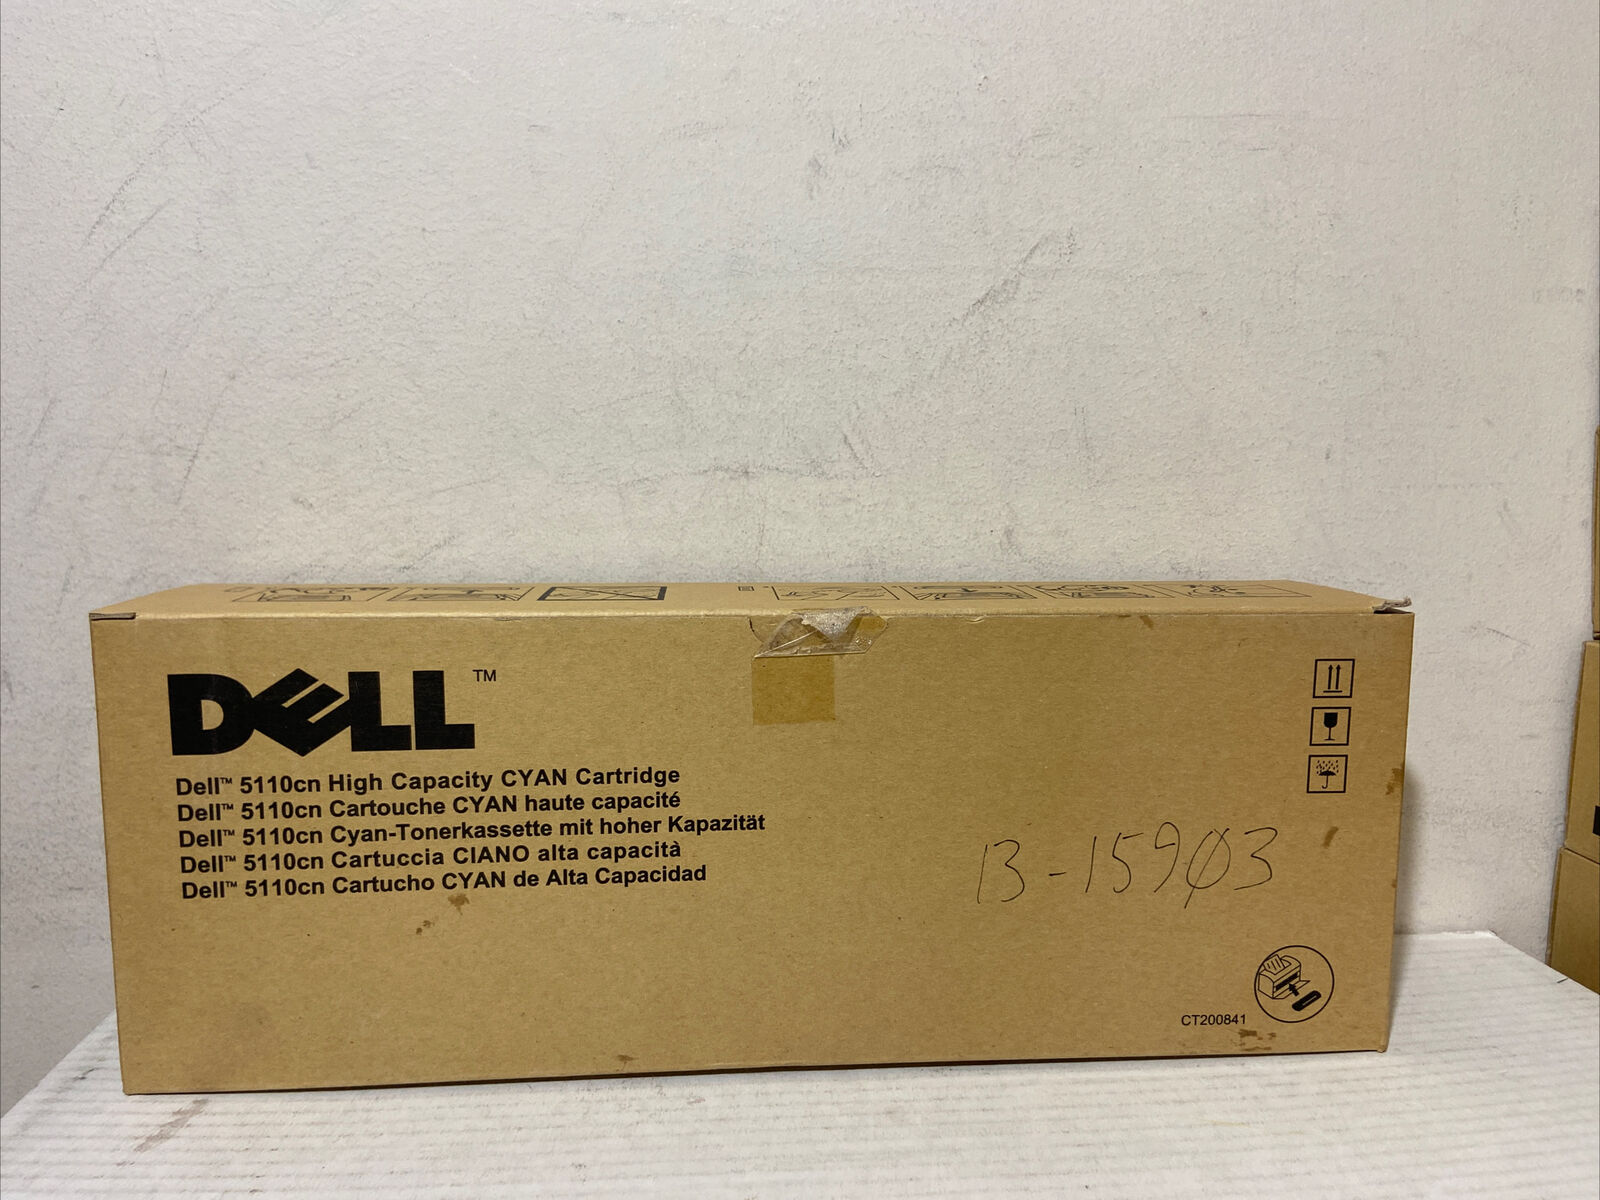 Genuine Dell CT200841/GD900 Cyan Dell 5110cn High Capacity